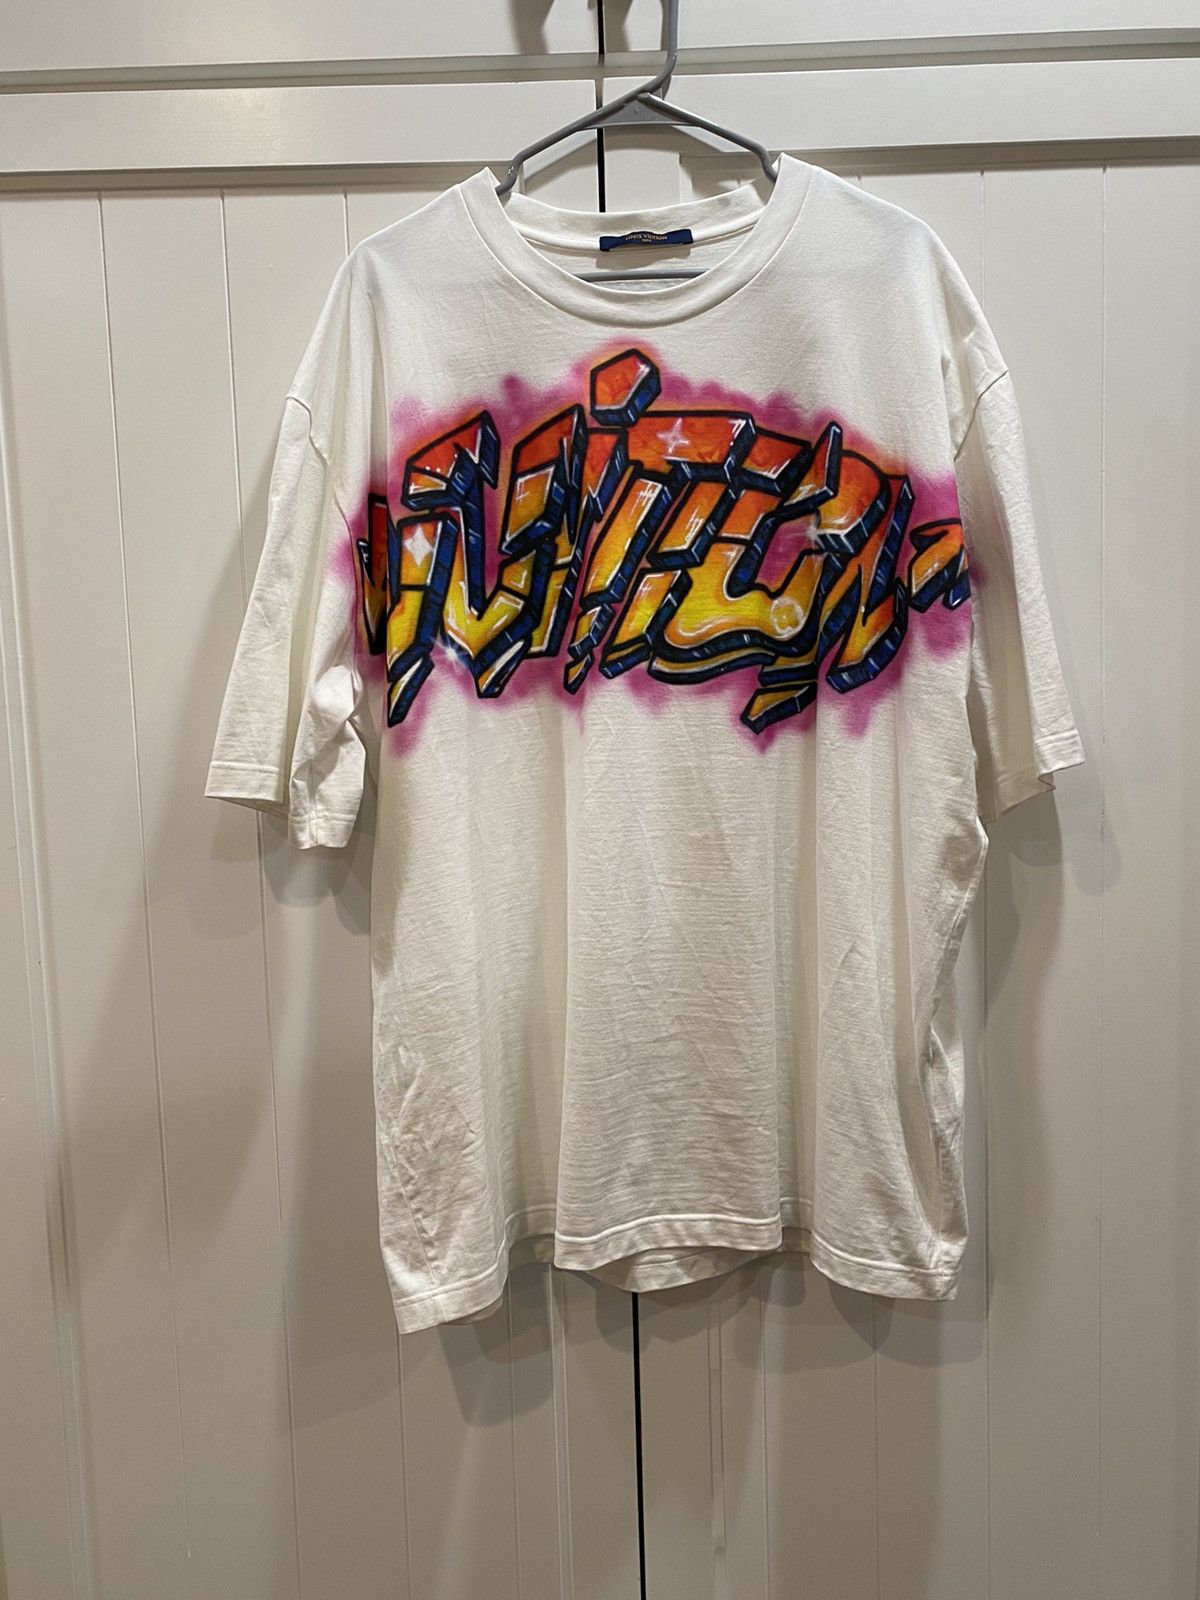 🔥New Arrive - LV Graffiti T-Shirt, By Thousand Step Collection